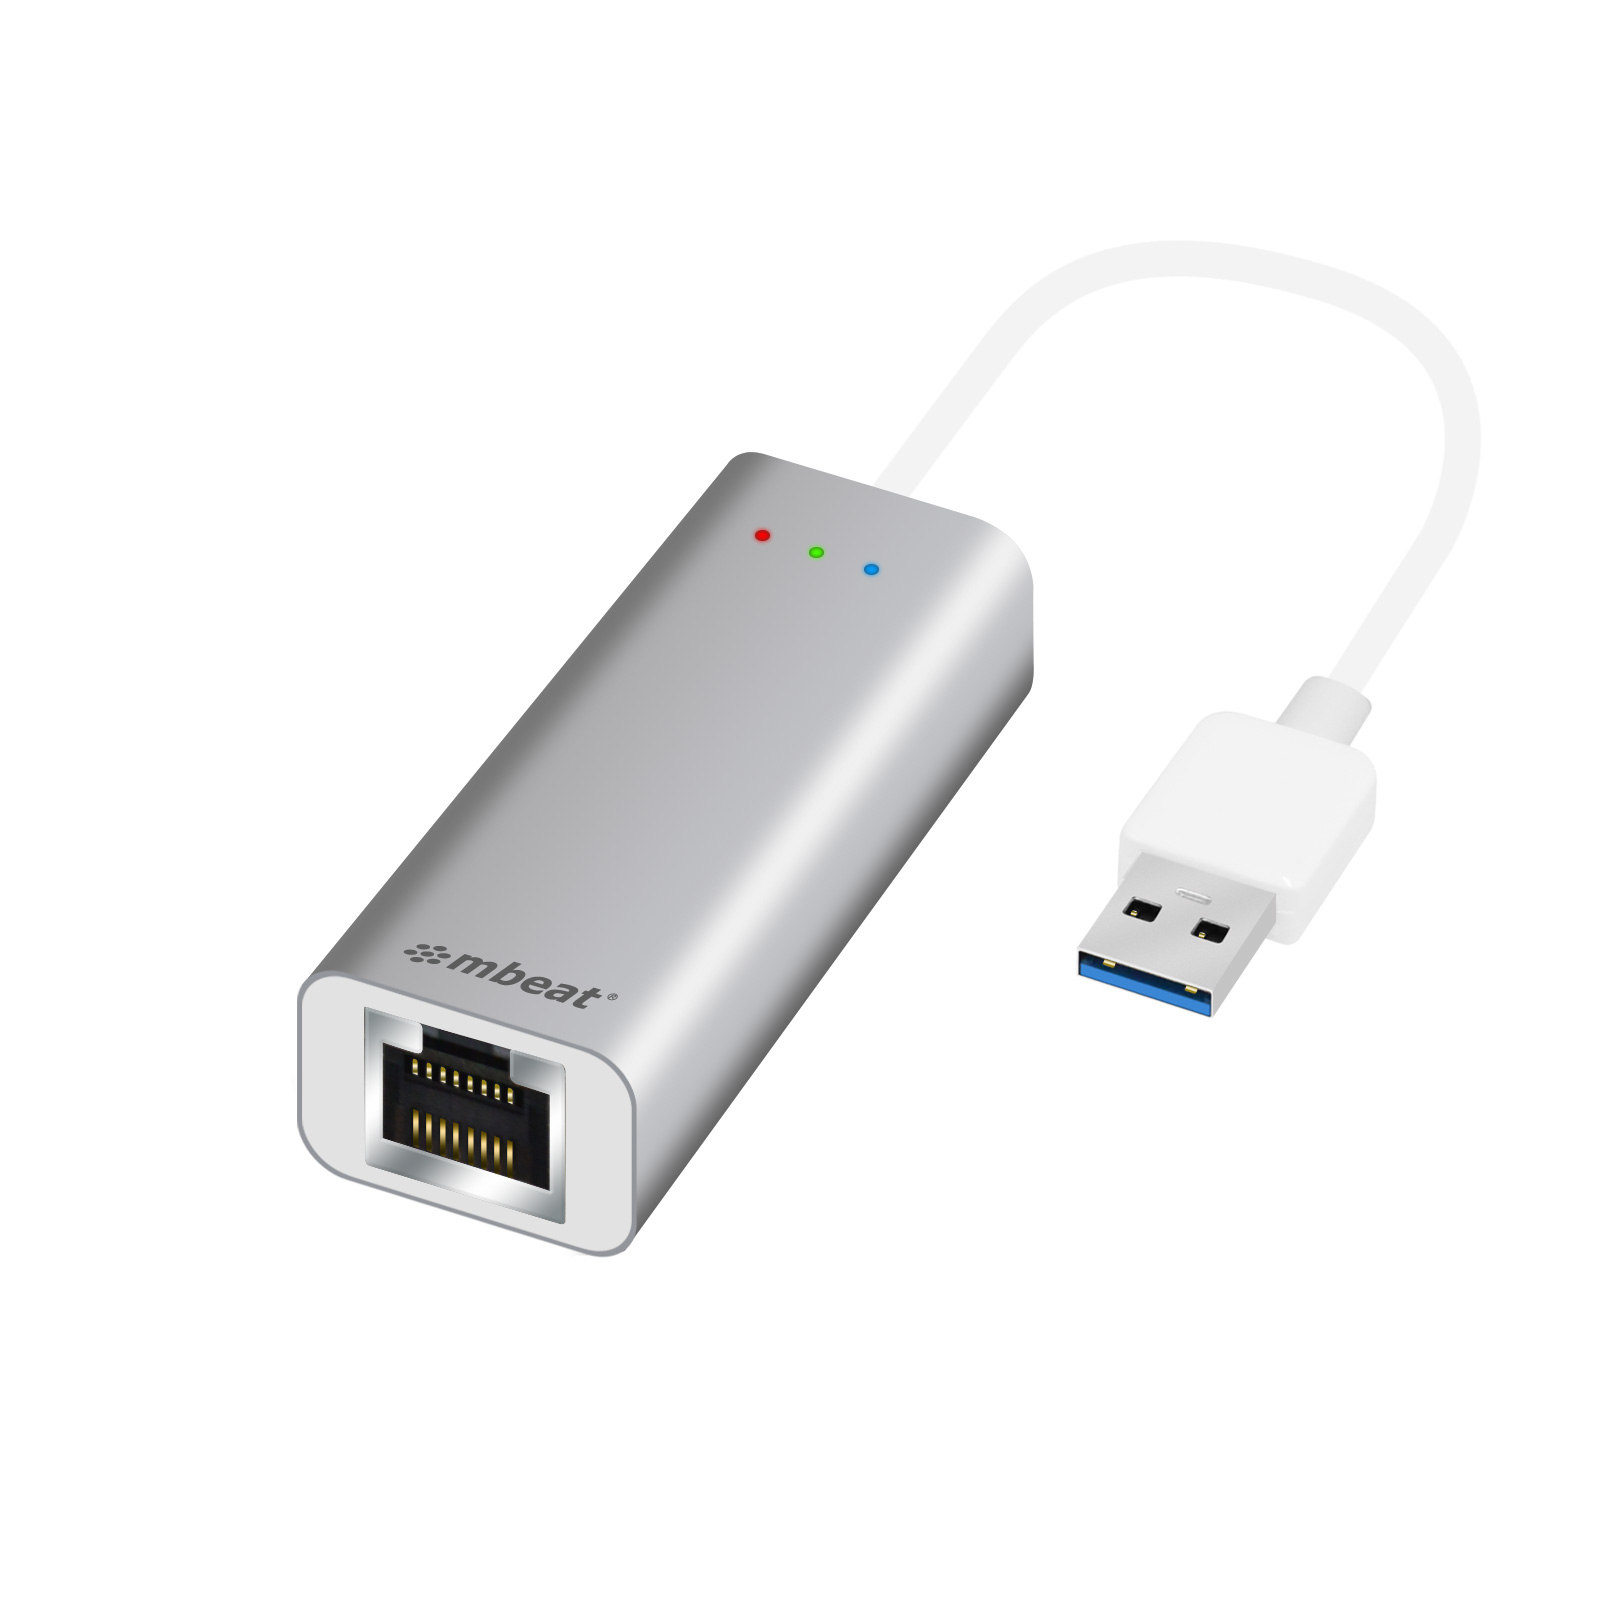 mbeat® USB 3.0 Gigabit LAN Adapter for PC and MAC/Compatible with 10/100/1000Mbps/USB 2.0,1.1/LED Indicators/Ethernet LAN Port